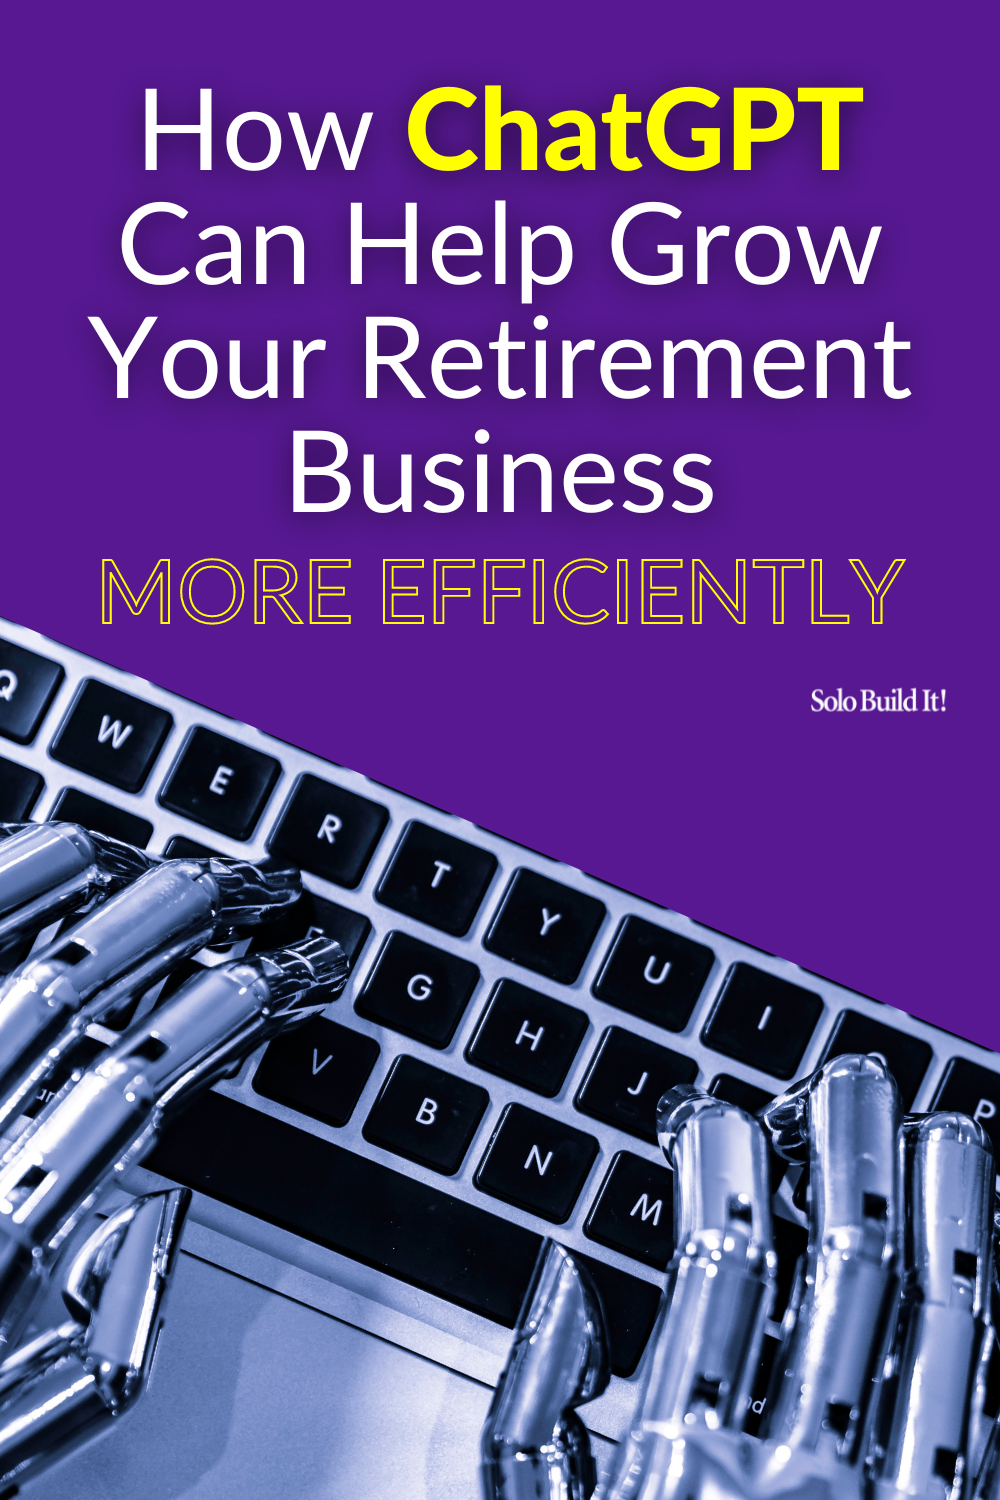 How to Grow a Retirement Business Using ChatGPT